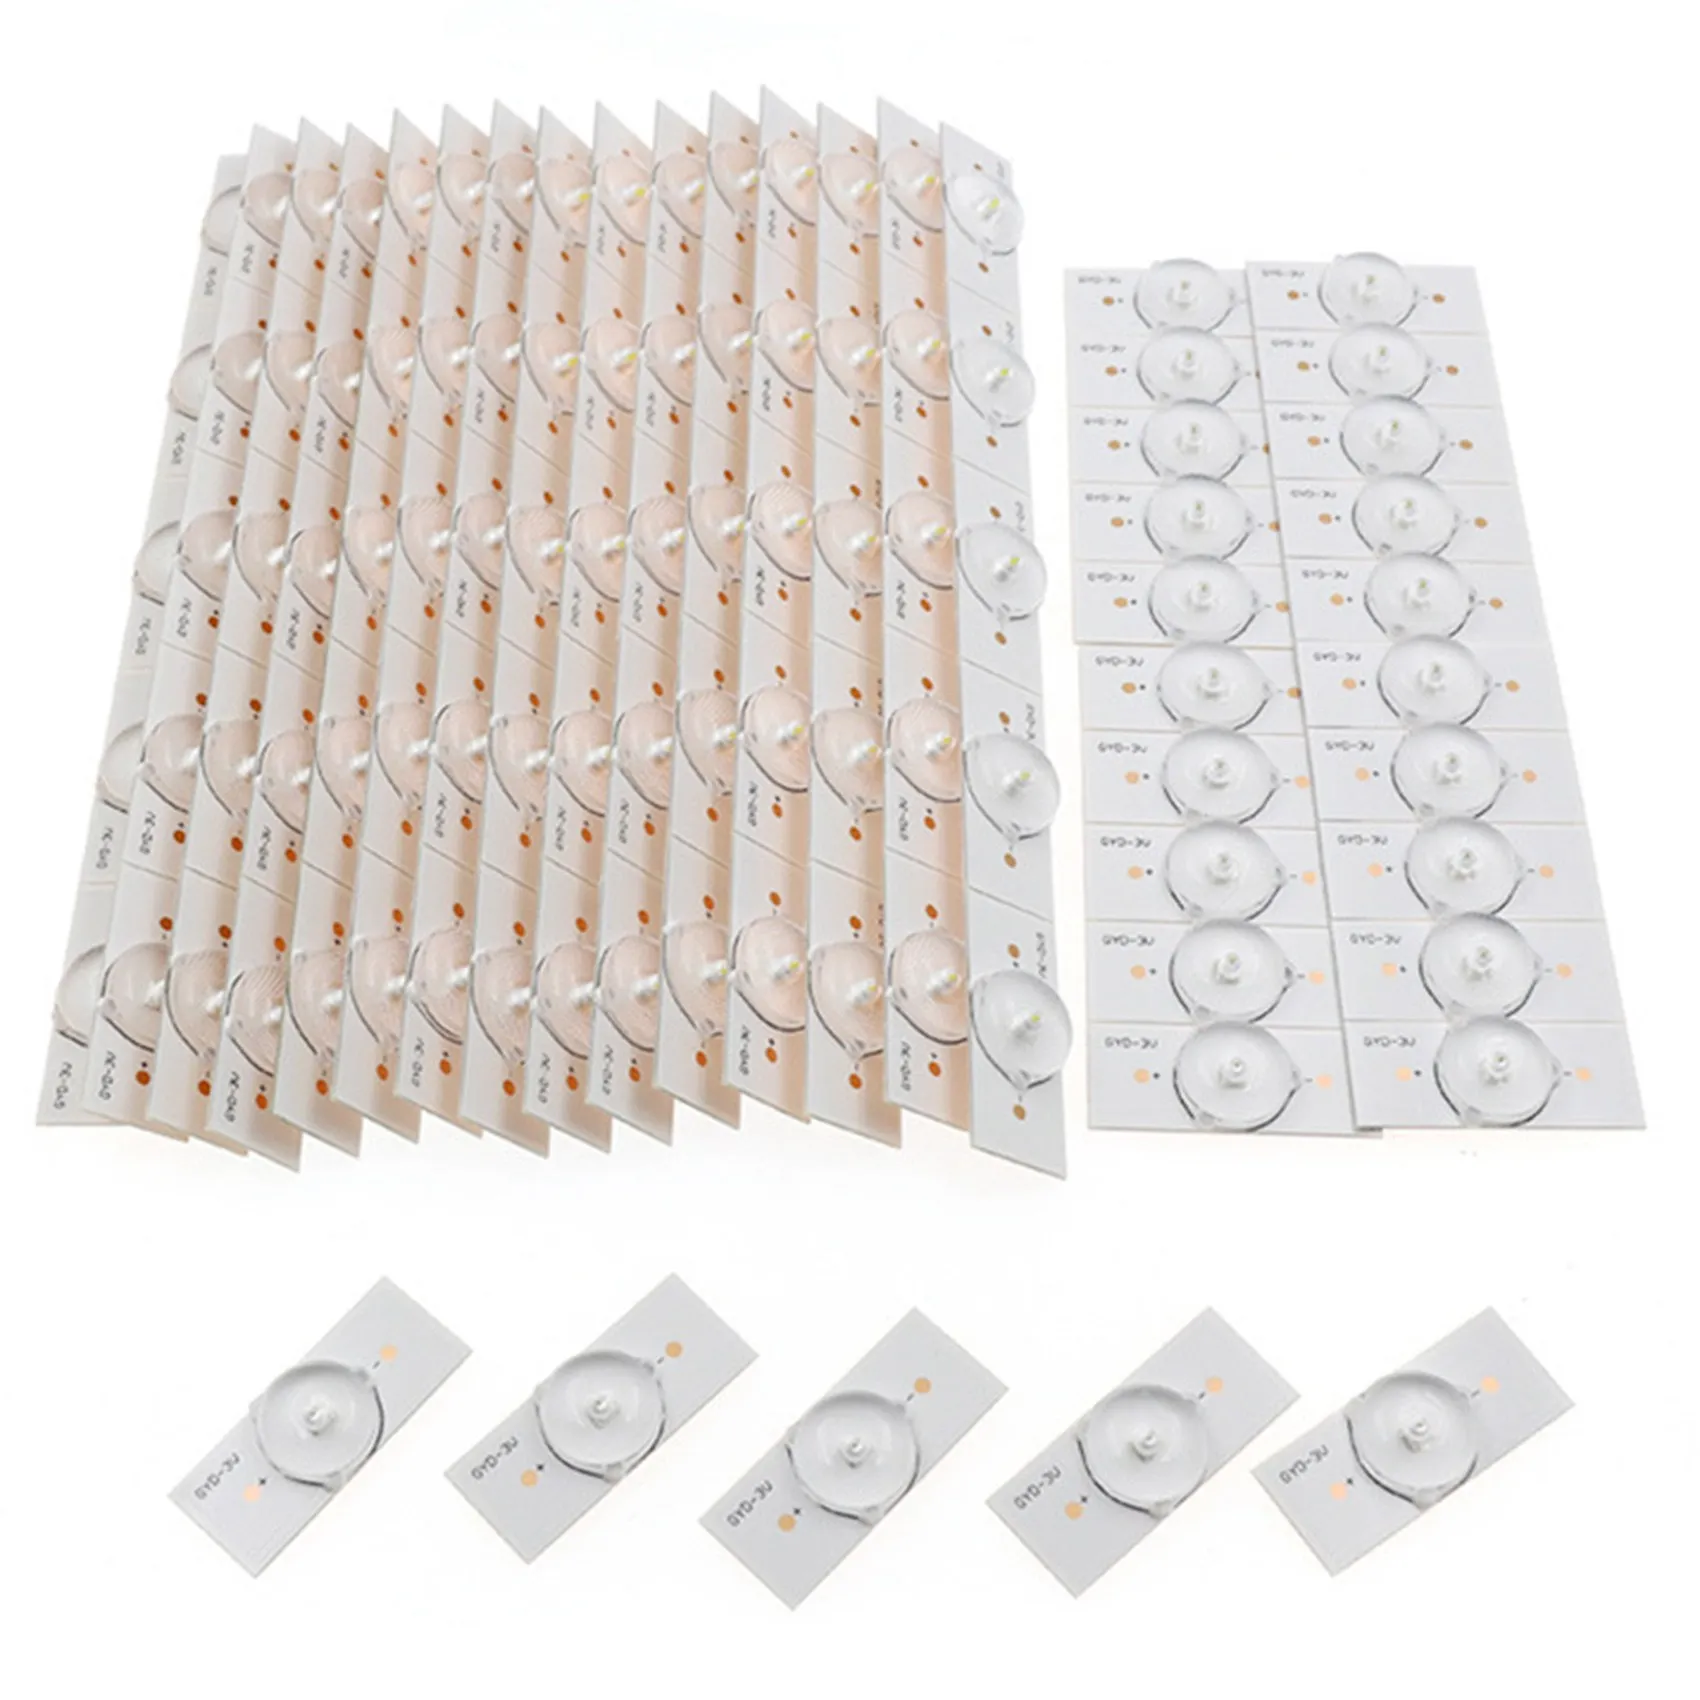 

100PCS 3V SMD Lamp Bead Optical Lens with Filter for 32-65 Inch LED TV Repair 2M Cable LED Backlight Bar Accessories